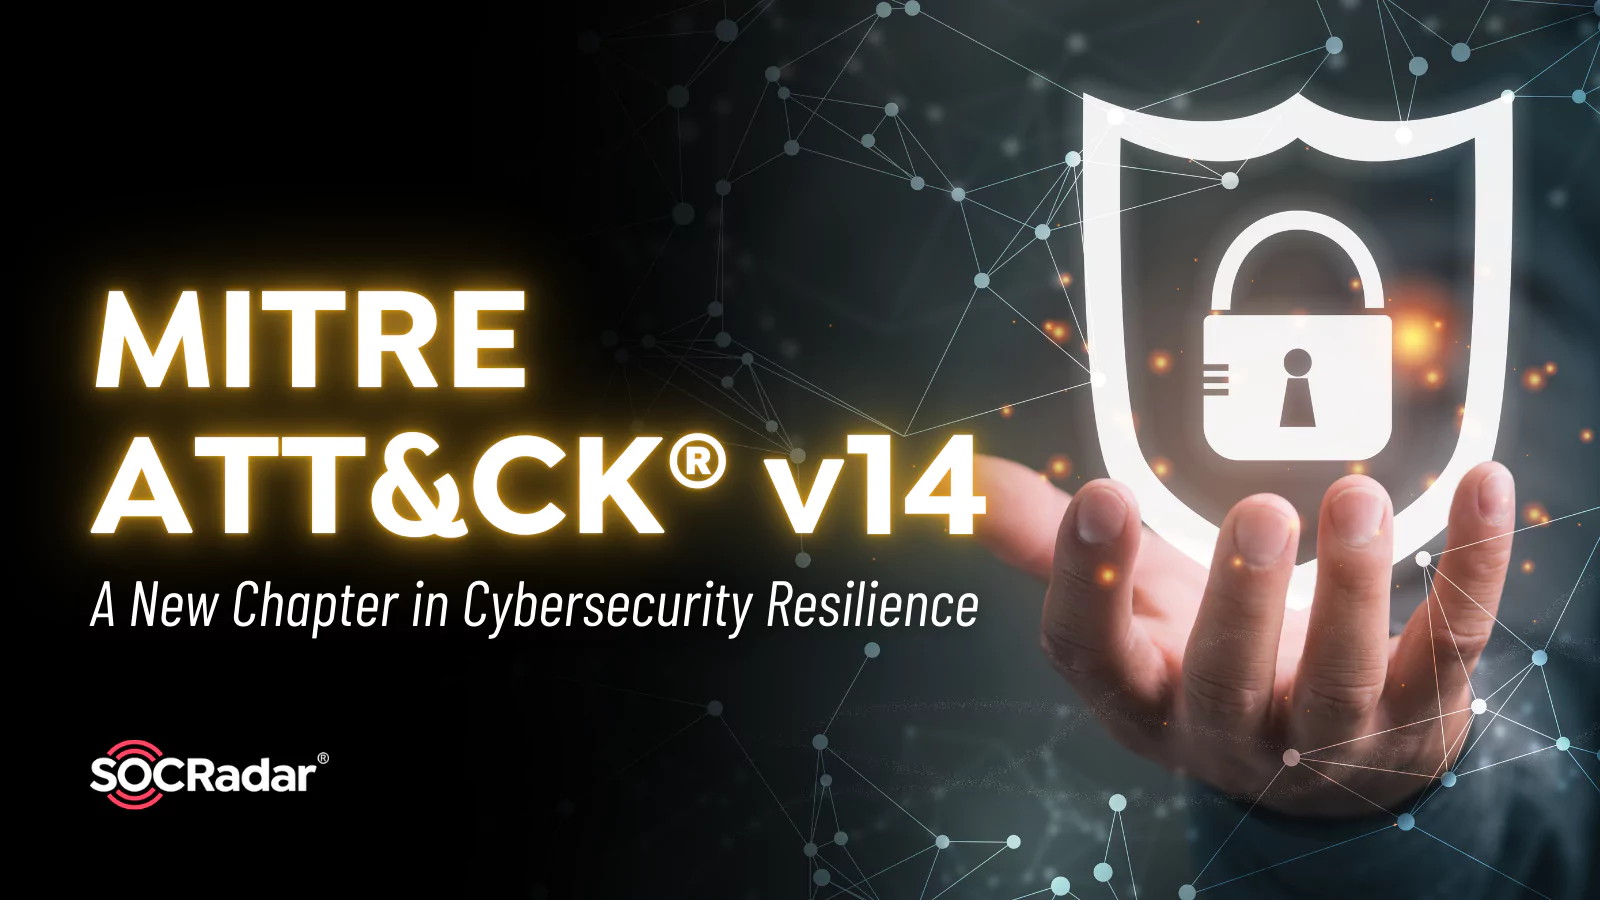 SOCRadar® Cyber Intelligence Inc. | MITRE ATT&CK® v14: A New Chapter in Cybersecurity Resilience